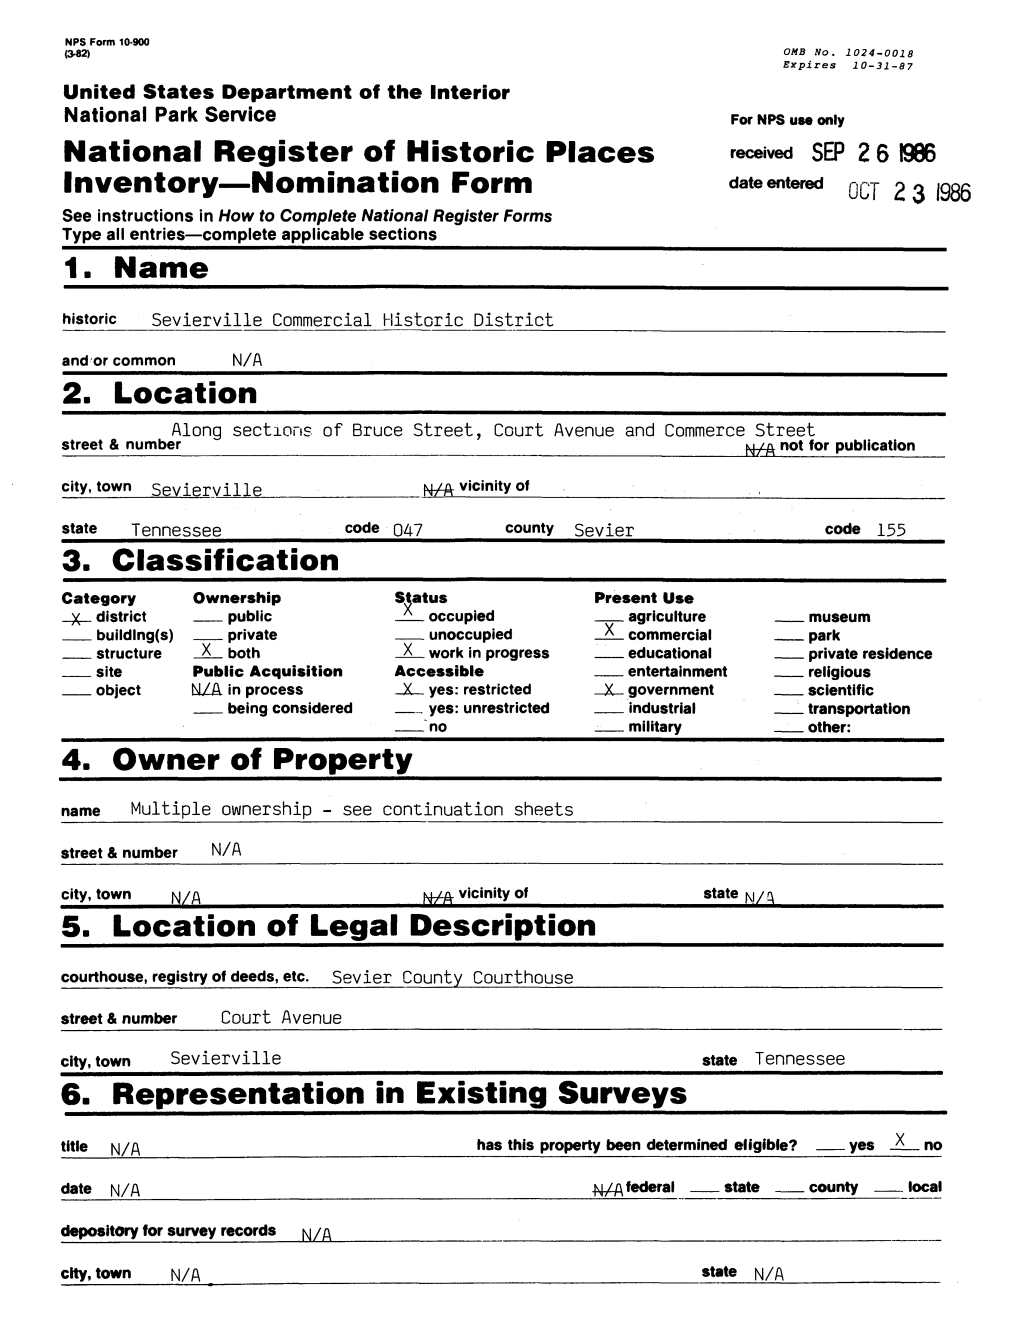 National Register of Historic Places Inventory—Nomination Form 2. Location 3. Classification 4. Owner Off Property 5. Location